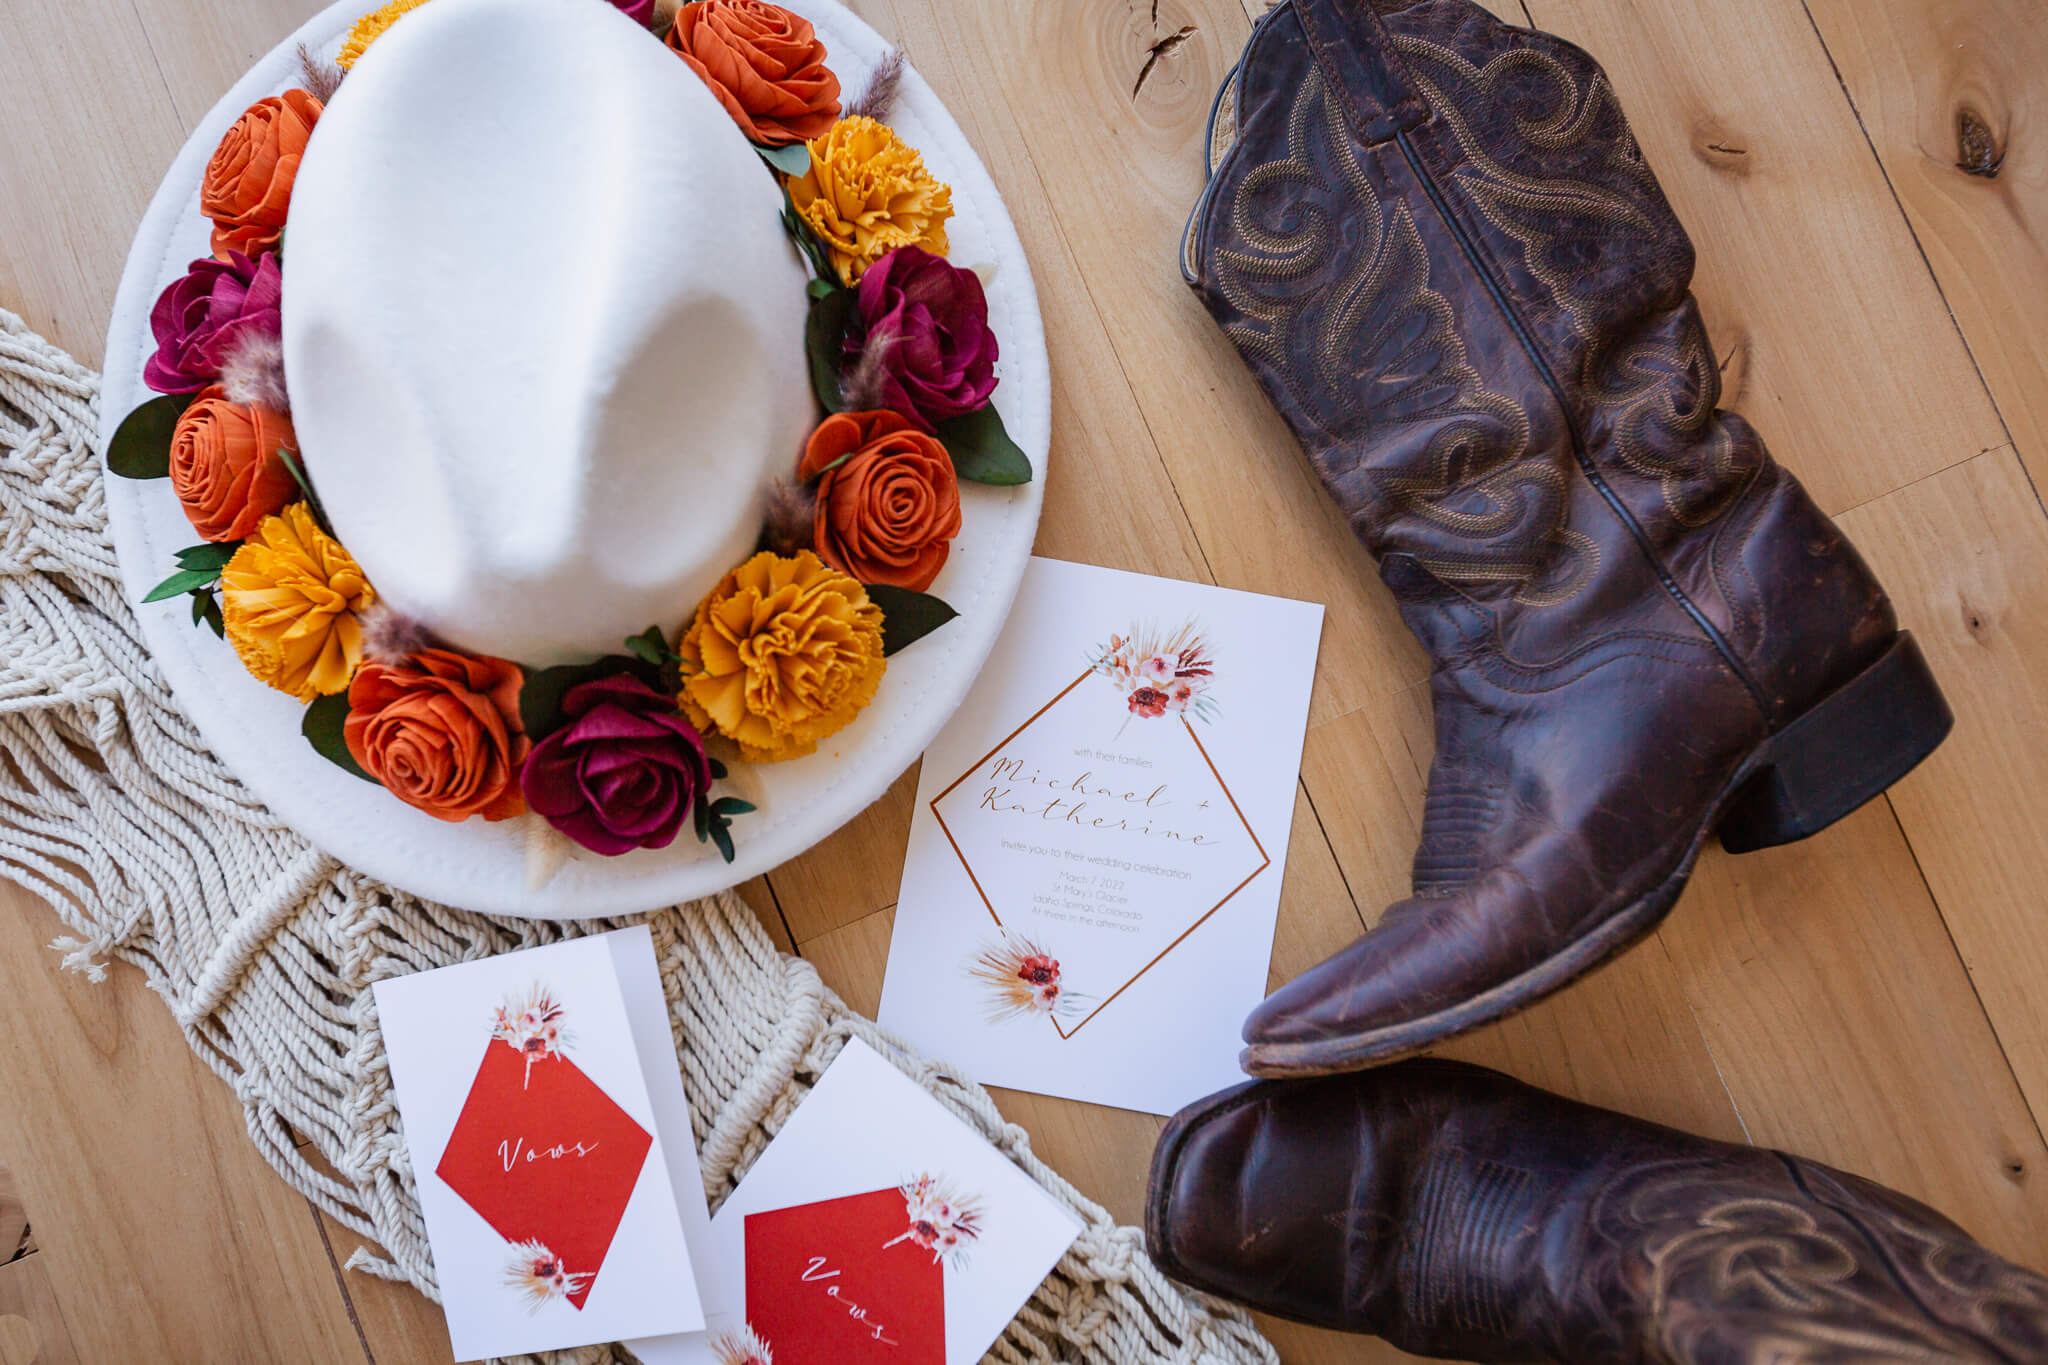 Wedding details: vow books & bride's hat and boots